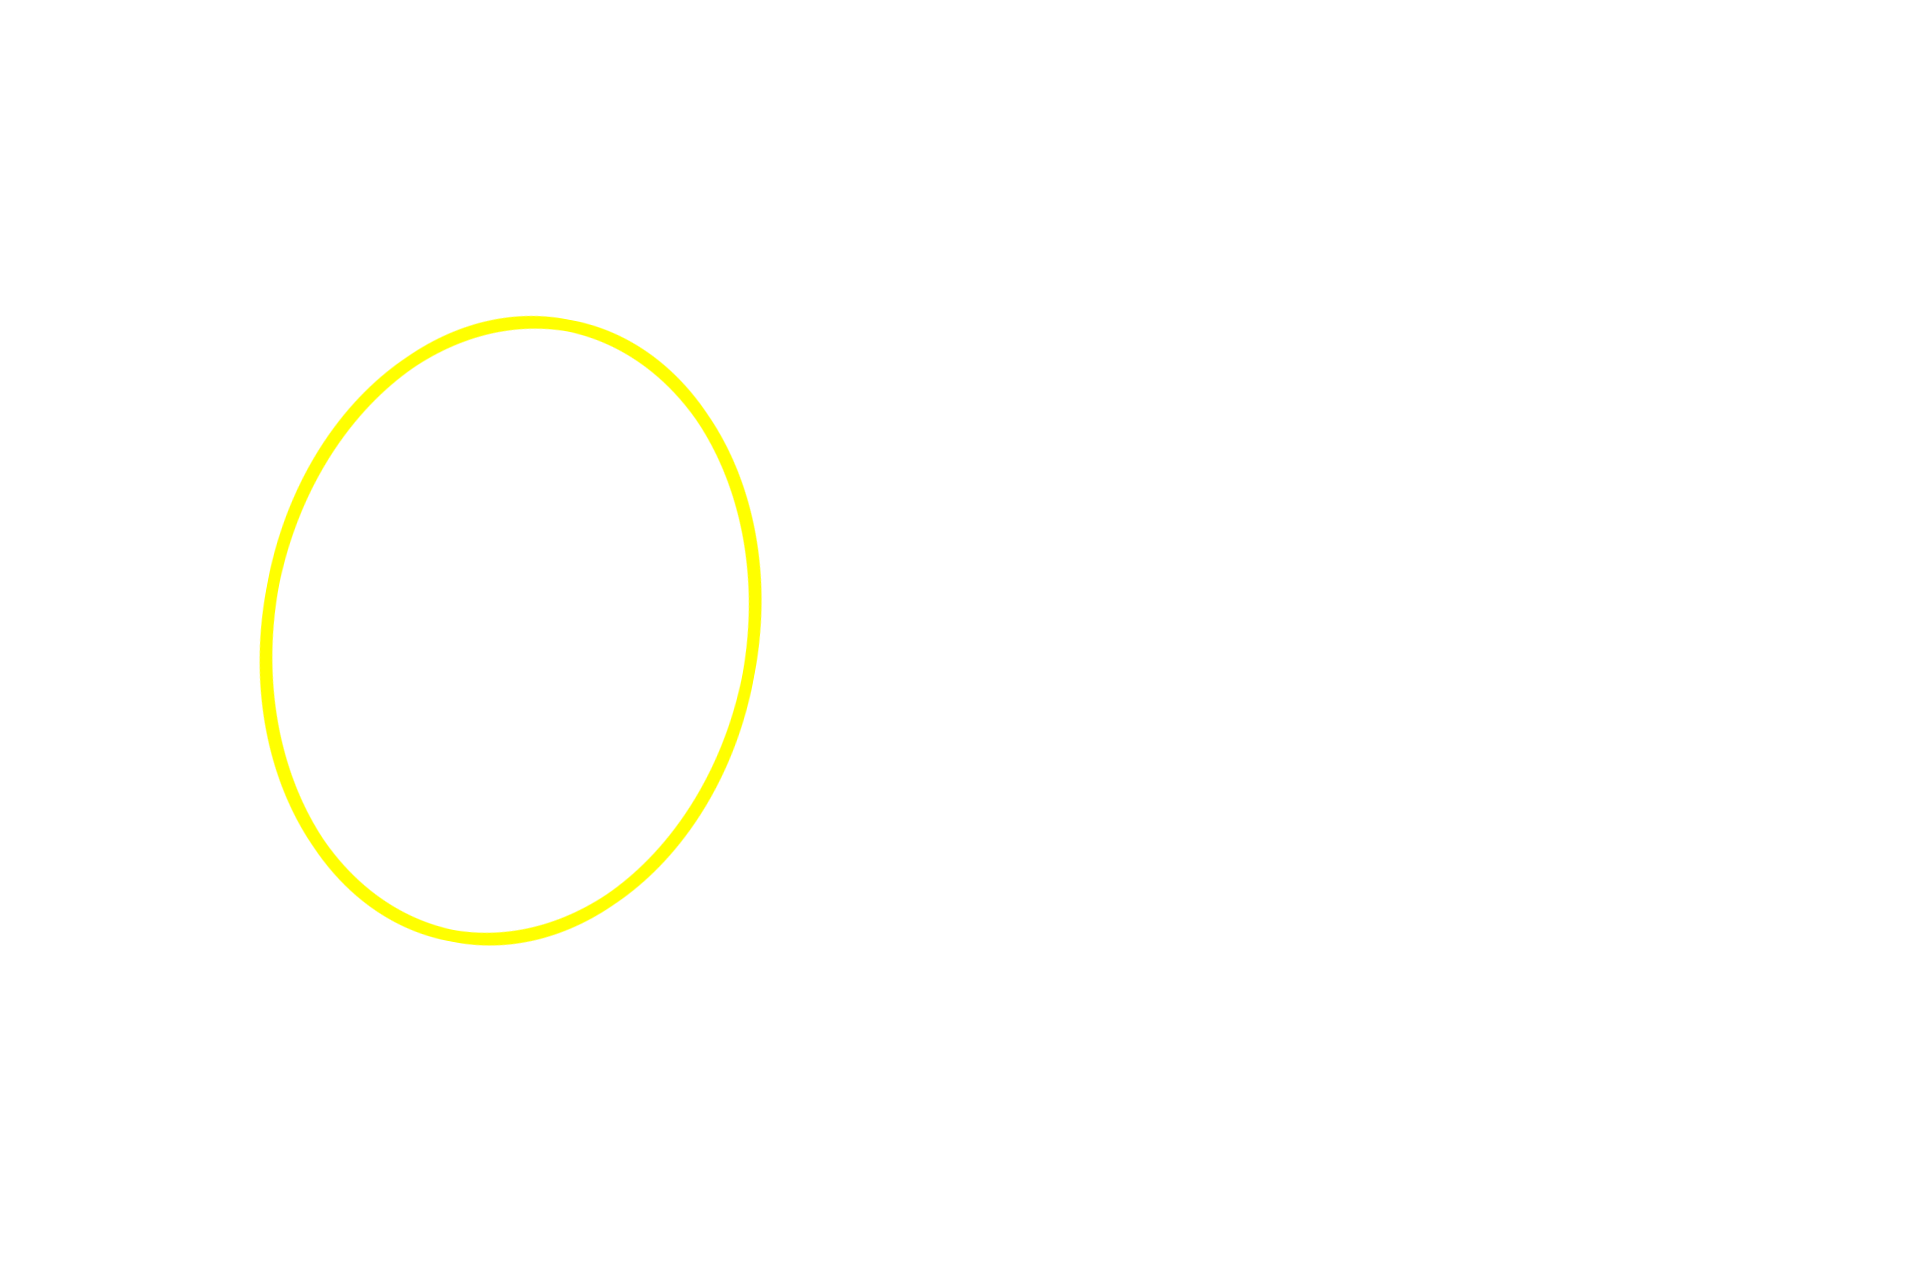 Lymphoid nodule <p>The central arteriole and its relationship to the PALS is seen at higher magnification (area indicated by the yellow frame in the inset).  For most of its course, the central arteriole is surrounded by PALS.  Frequently, lymphoid nodules, B-dependent areas that form part of white pulp, develop within the PALS, causing the central arteriole to be eccentrically located.  A germinal center is just beginning to form.  200x</p>
